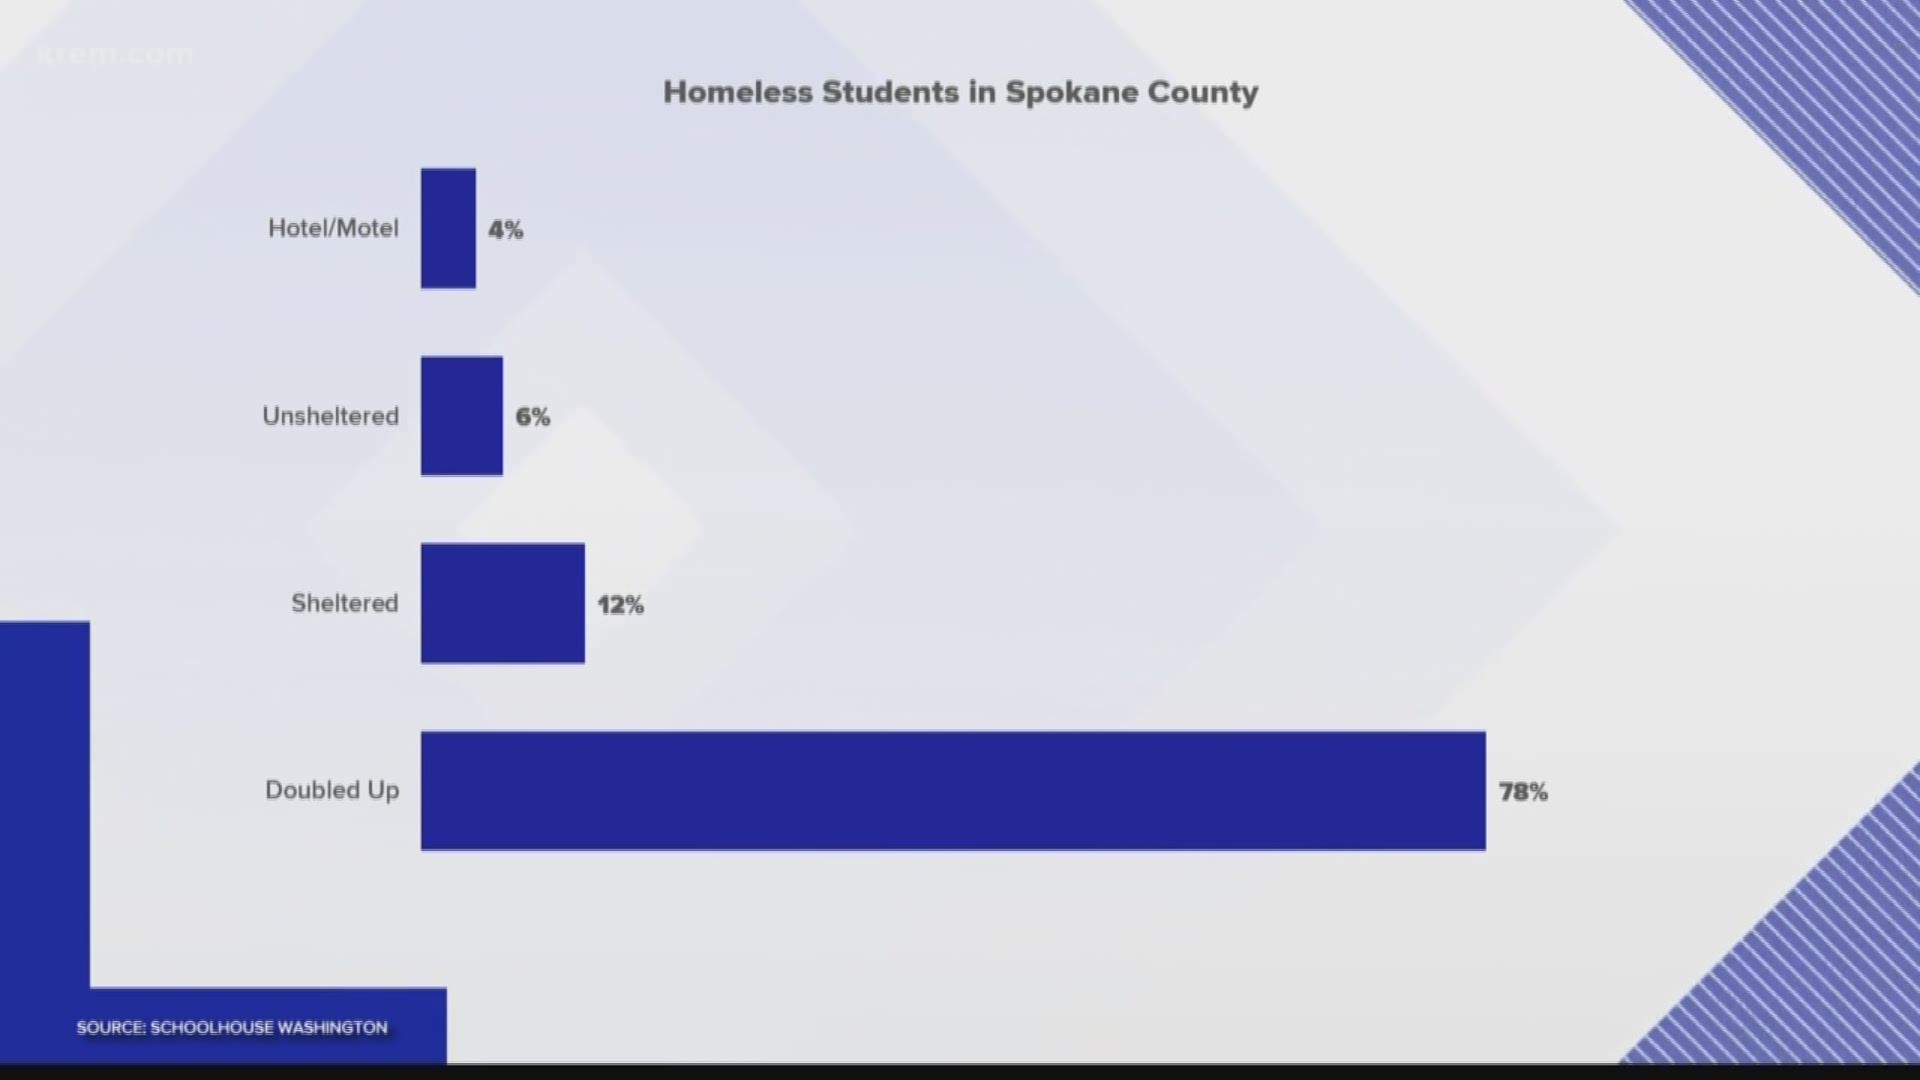 A new study says there are 3,293 homeless students in Spokane County. But the point-in-time count says 1,309 homeless residents altogether. How can that be?